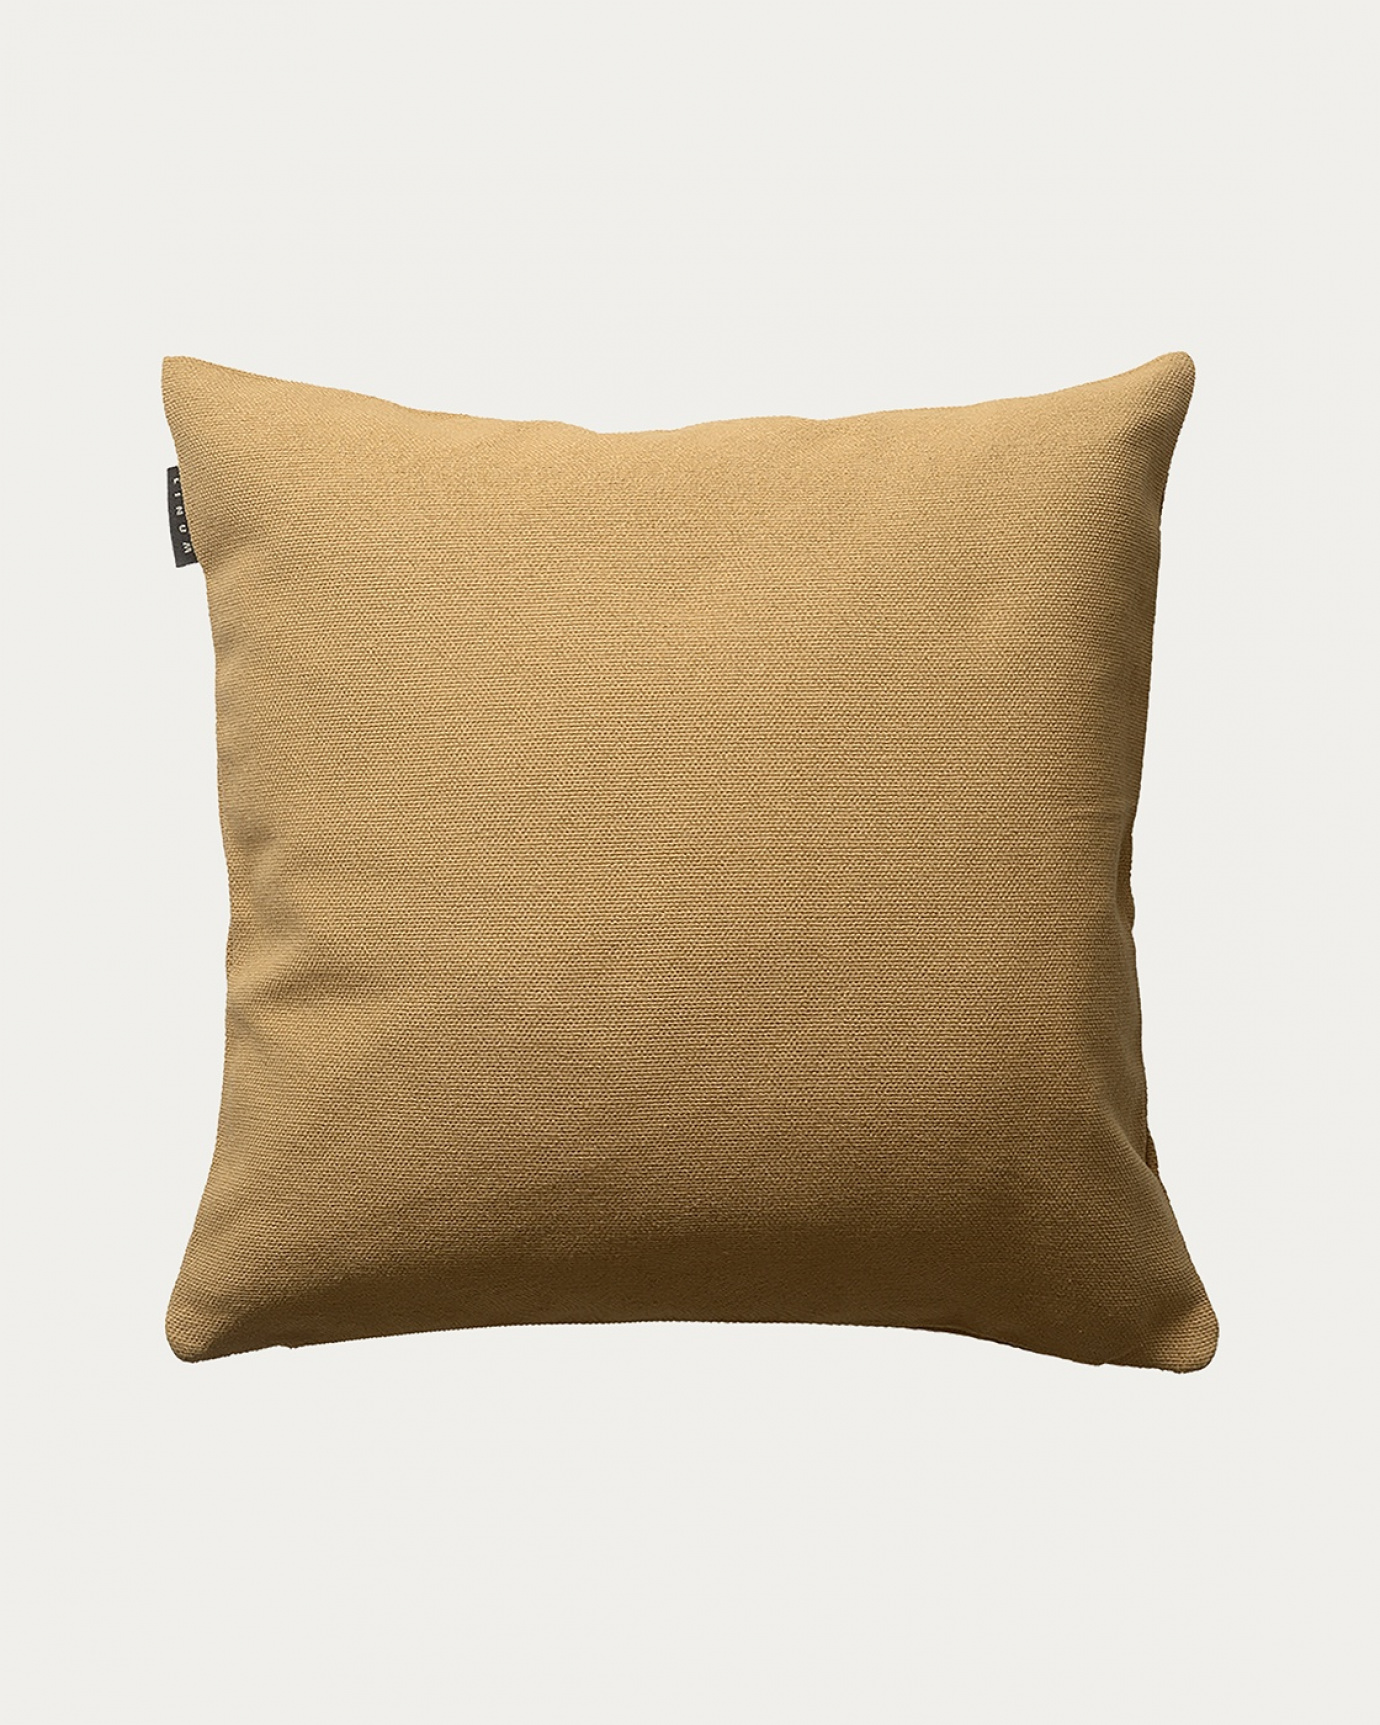 Product image straw yellow PEPPER cushion cover made of soft cotton from LINUM DESIGN. Easy to wash and durable for generations. Size 50x50 cm.